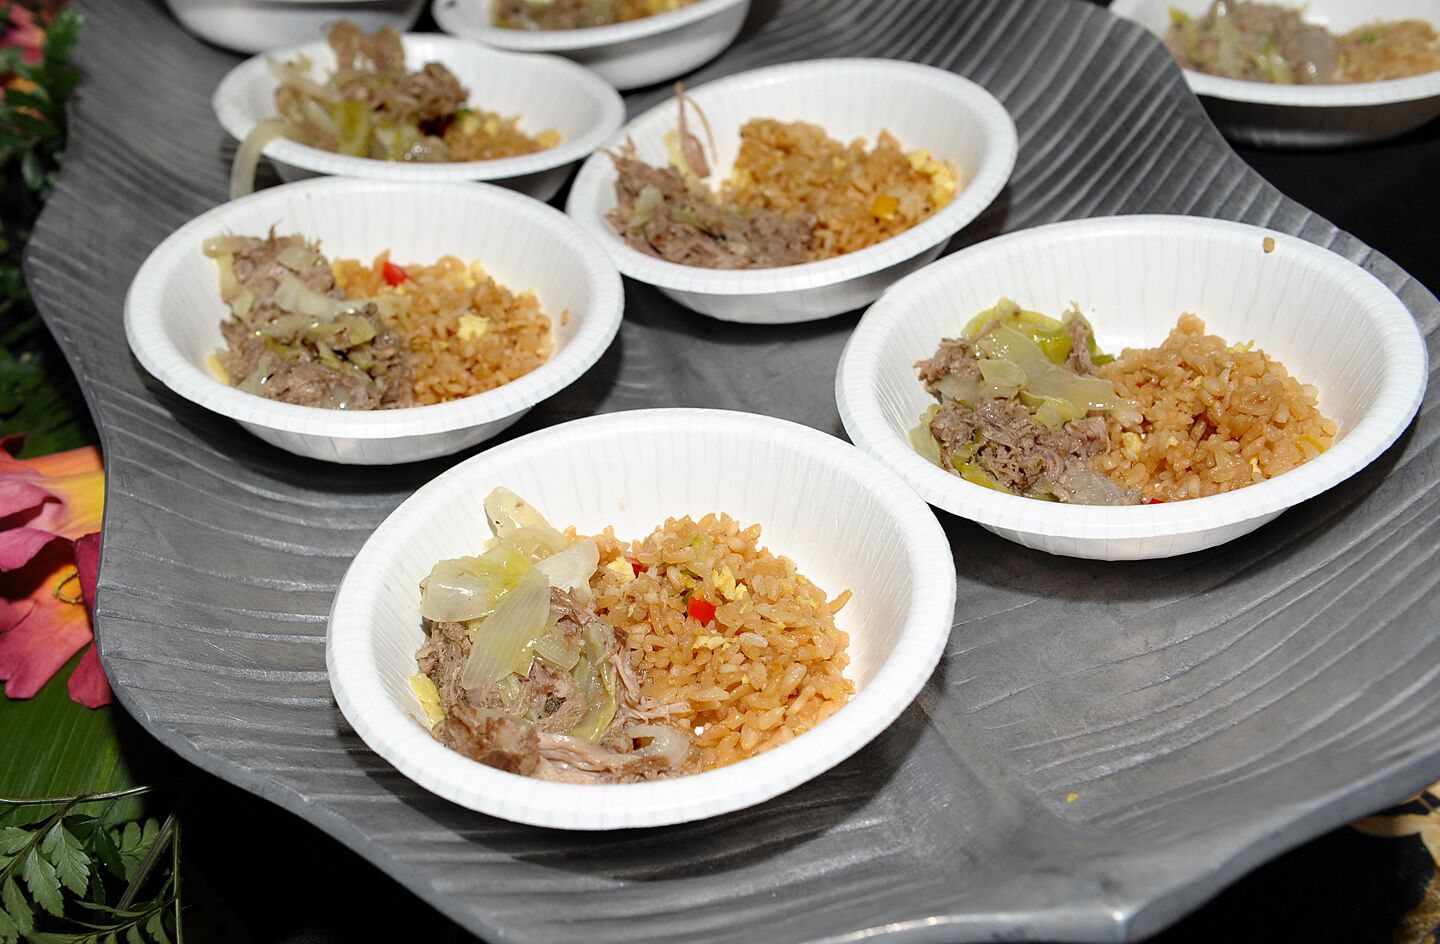 There was poke for days at the 10th annual I Love Poke San Diego 2019, a poke tasting event and competition featuring 30+ of the city's finest chefs and restaurants at the Bali Hai Restaurant on Shelter Island on Tuesday, May 21, 2019.